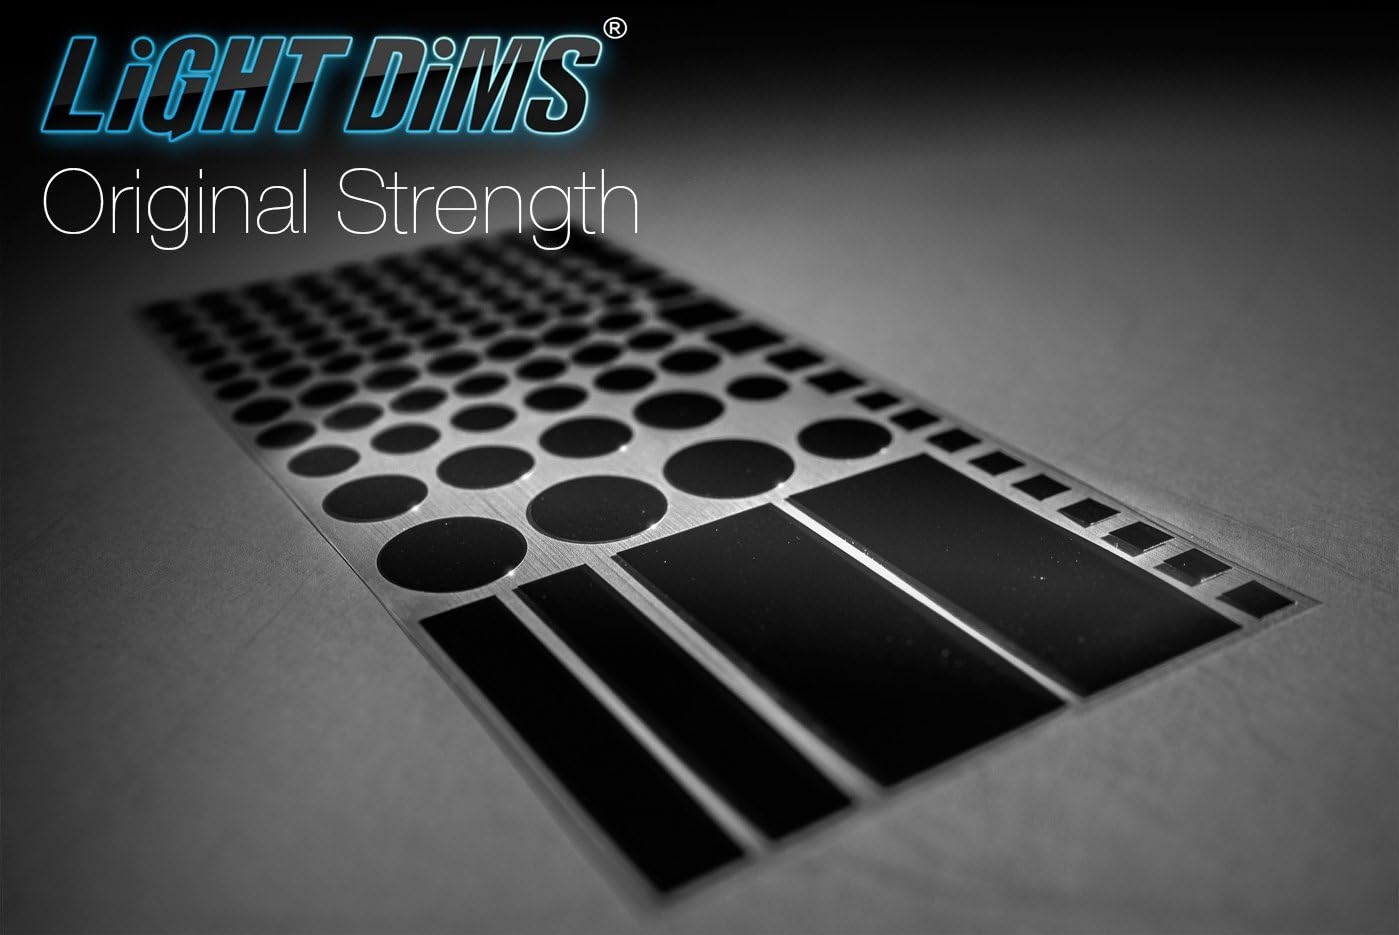 LightDims Original Strength - Light Dimming LED Covers and Light Dimming Sheets for Routers, Electronics and Appliances and More. Dims 50-80% of Light, in Minimal Packaging.